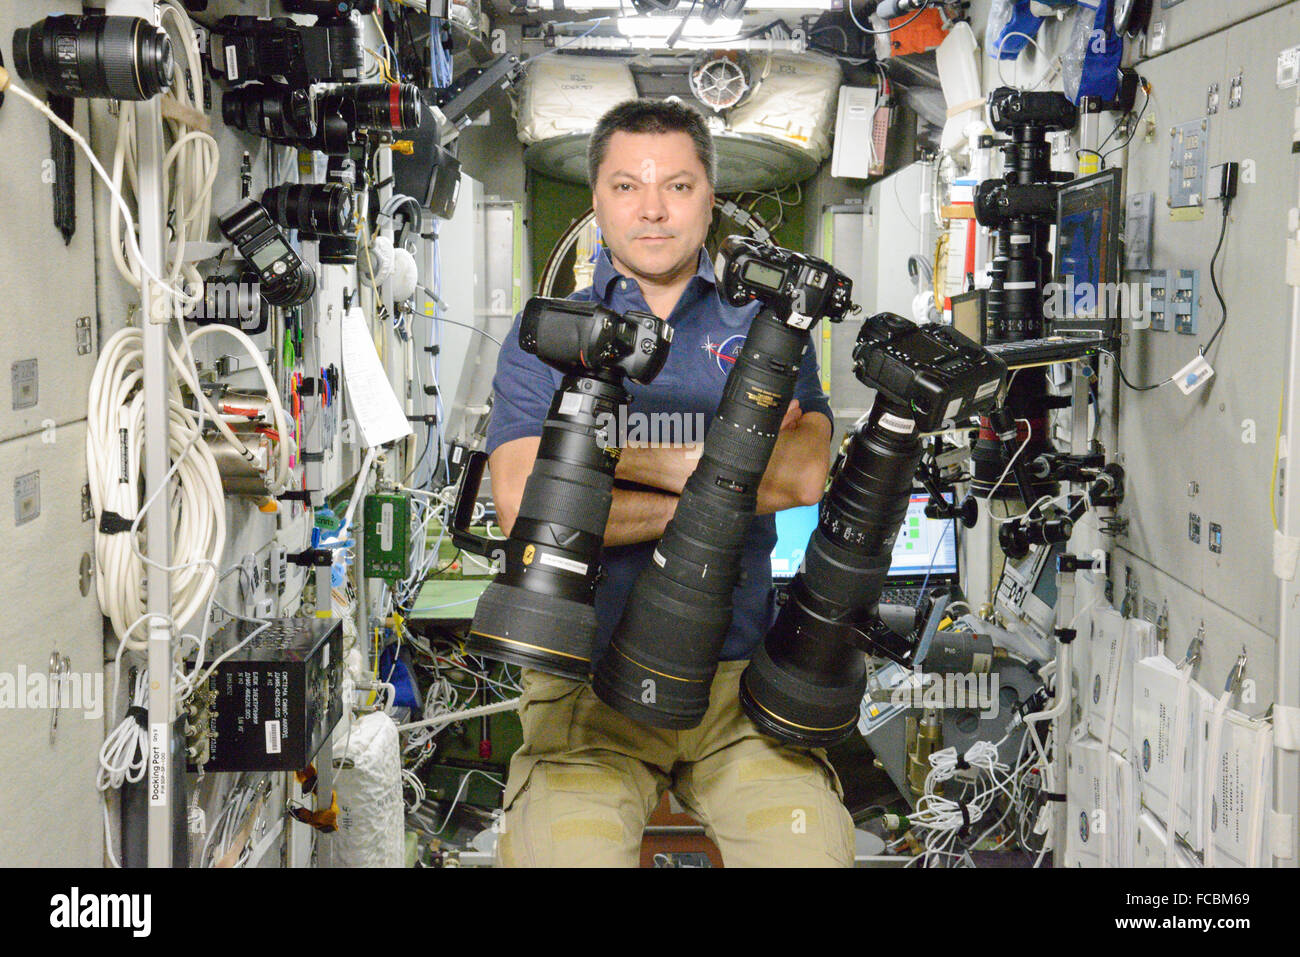 Russian cosmonaut Oleg Kononenko poses with a variety of photography equipment aboard the International Space Station October 6, 2015 in Earth Orbit. International crew members have taken more than 2.5 million images throughout the over 15 years humans have been living aboard the orbiting laboratory. Stock Photo